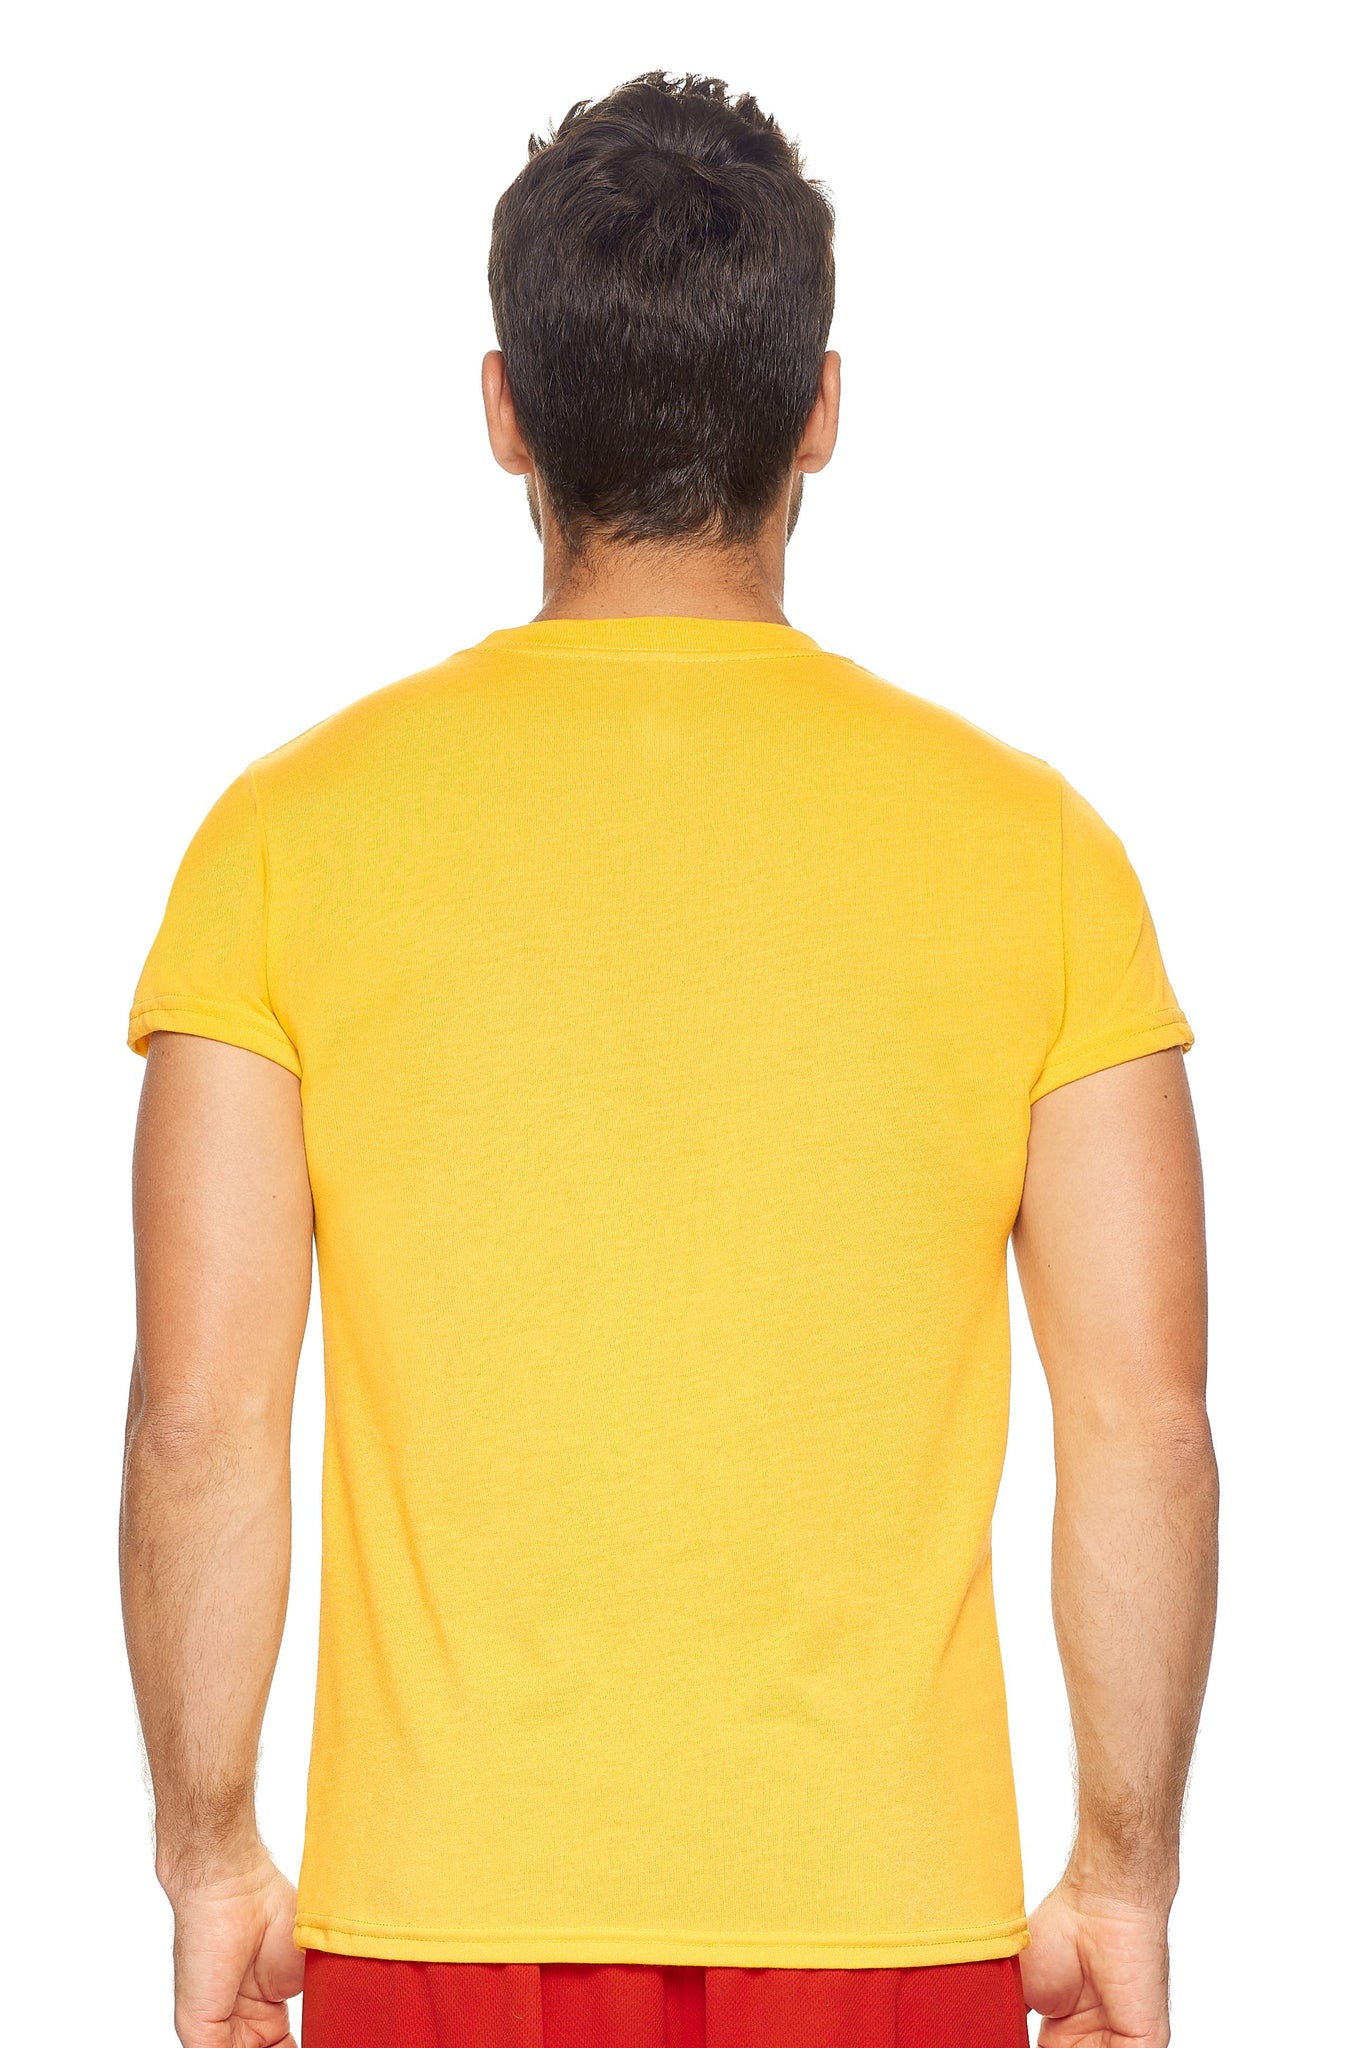 Expert Brand Wholesale Military Physical Training T-Shirt in Yellow Image 3#yellow